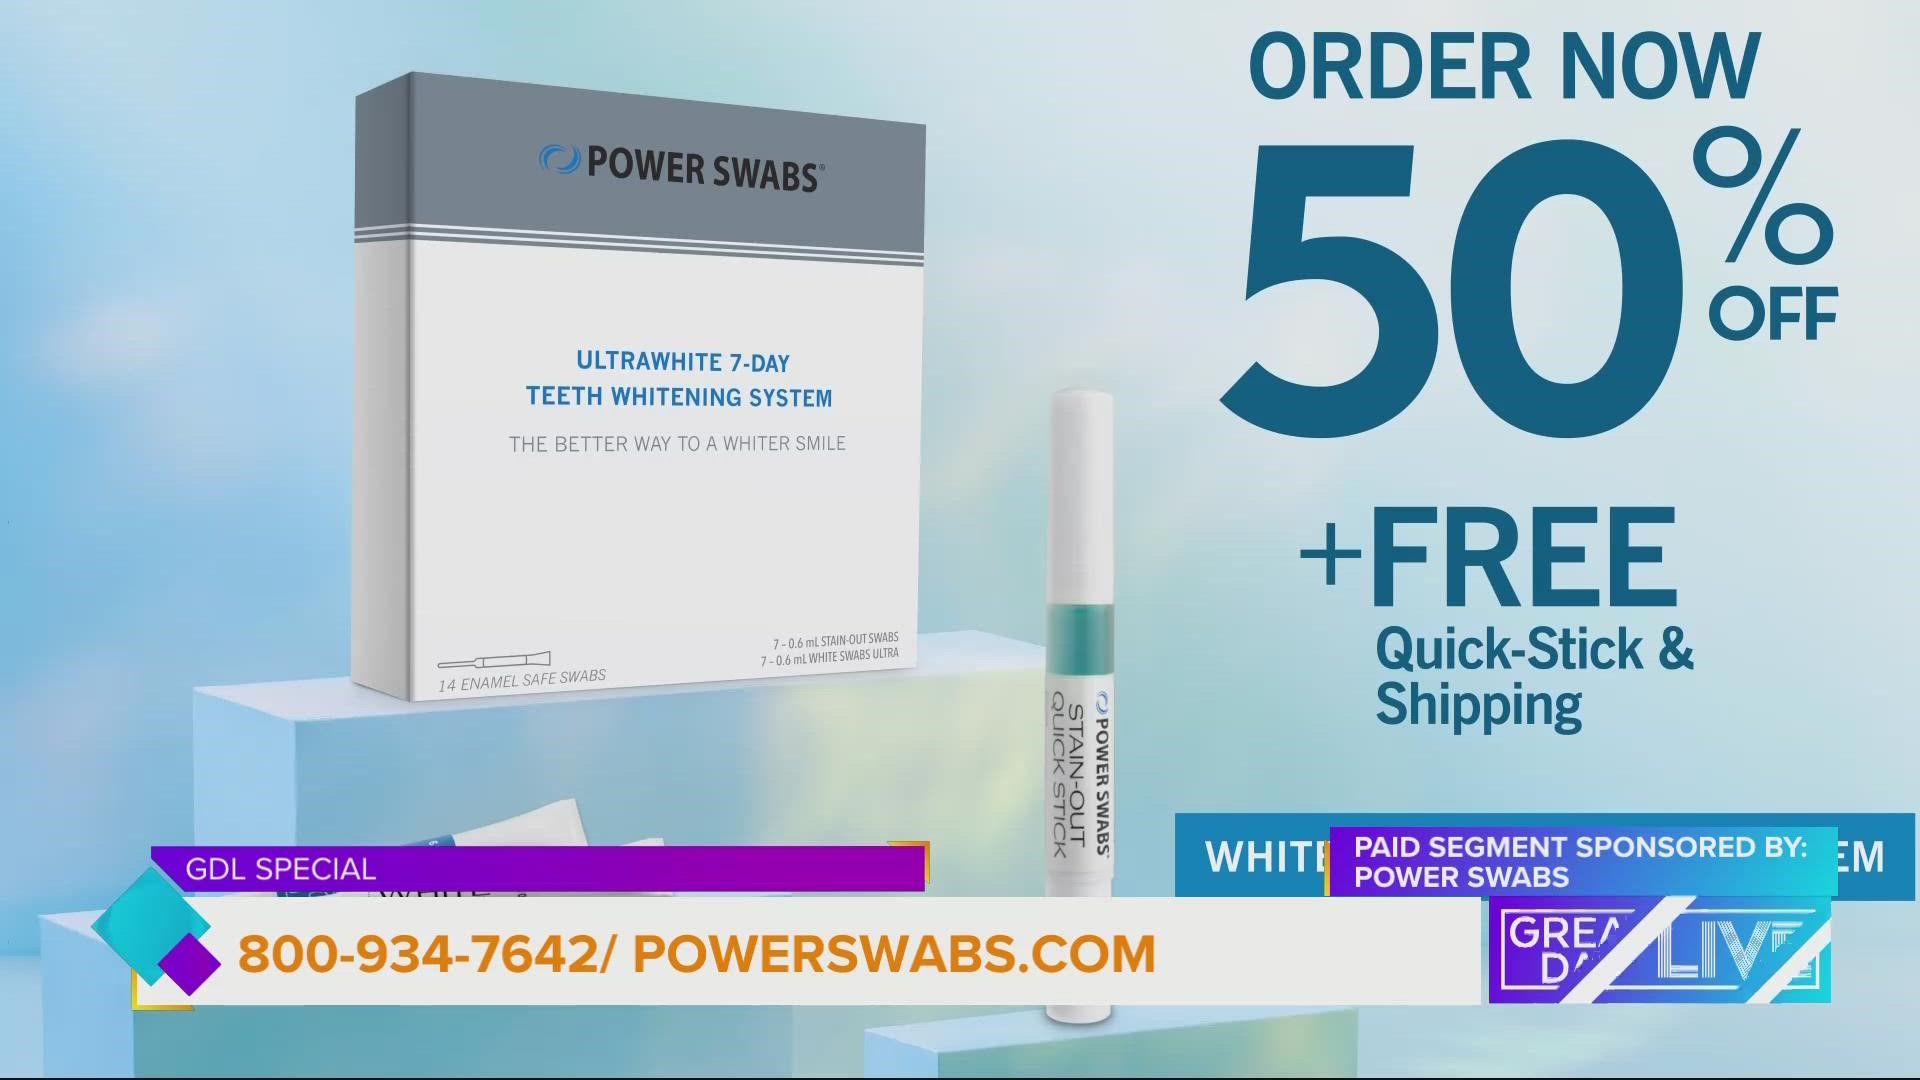 Power Swabs can whiten your teeth without painful sensitivity and right from your home.
GDL viewers you can  now get 50% off if you call 800-934-7642.